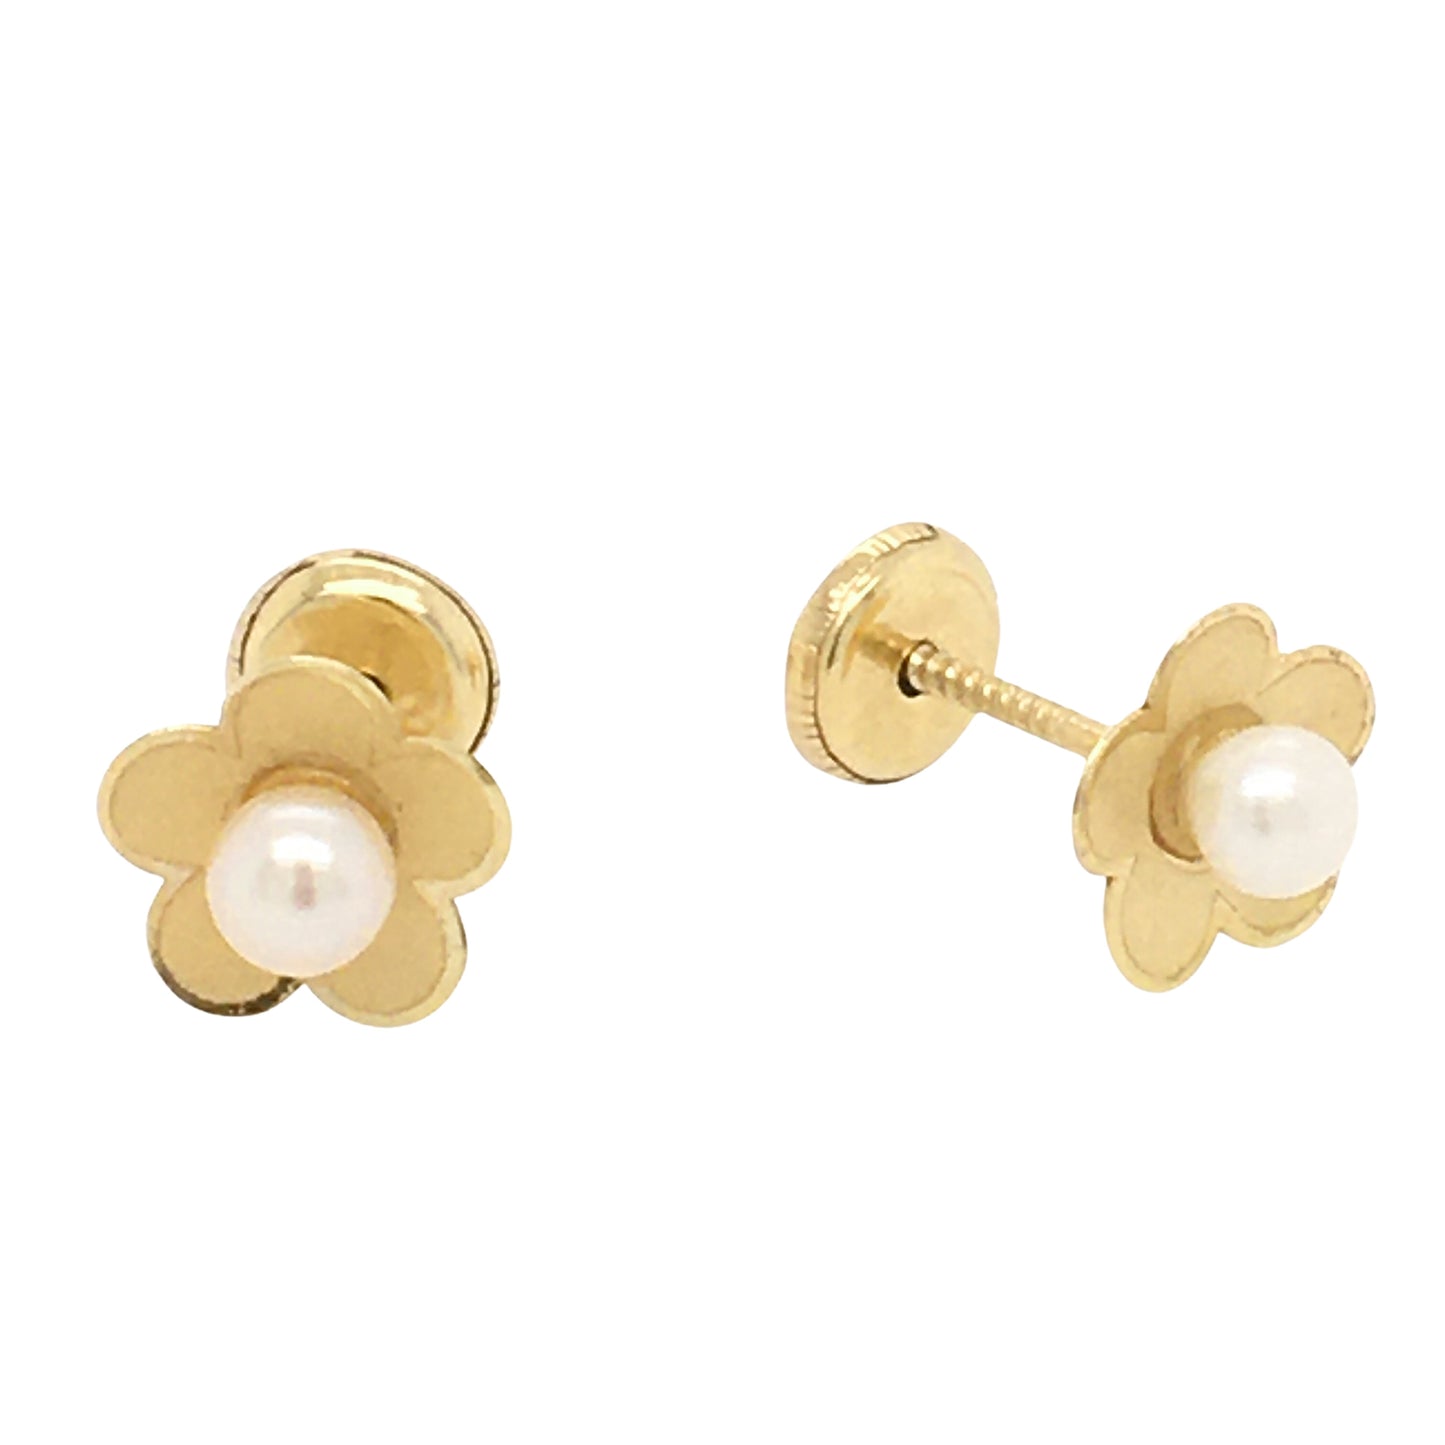 Brush Finish Flower with Pearl in center earring